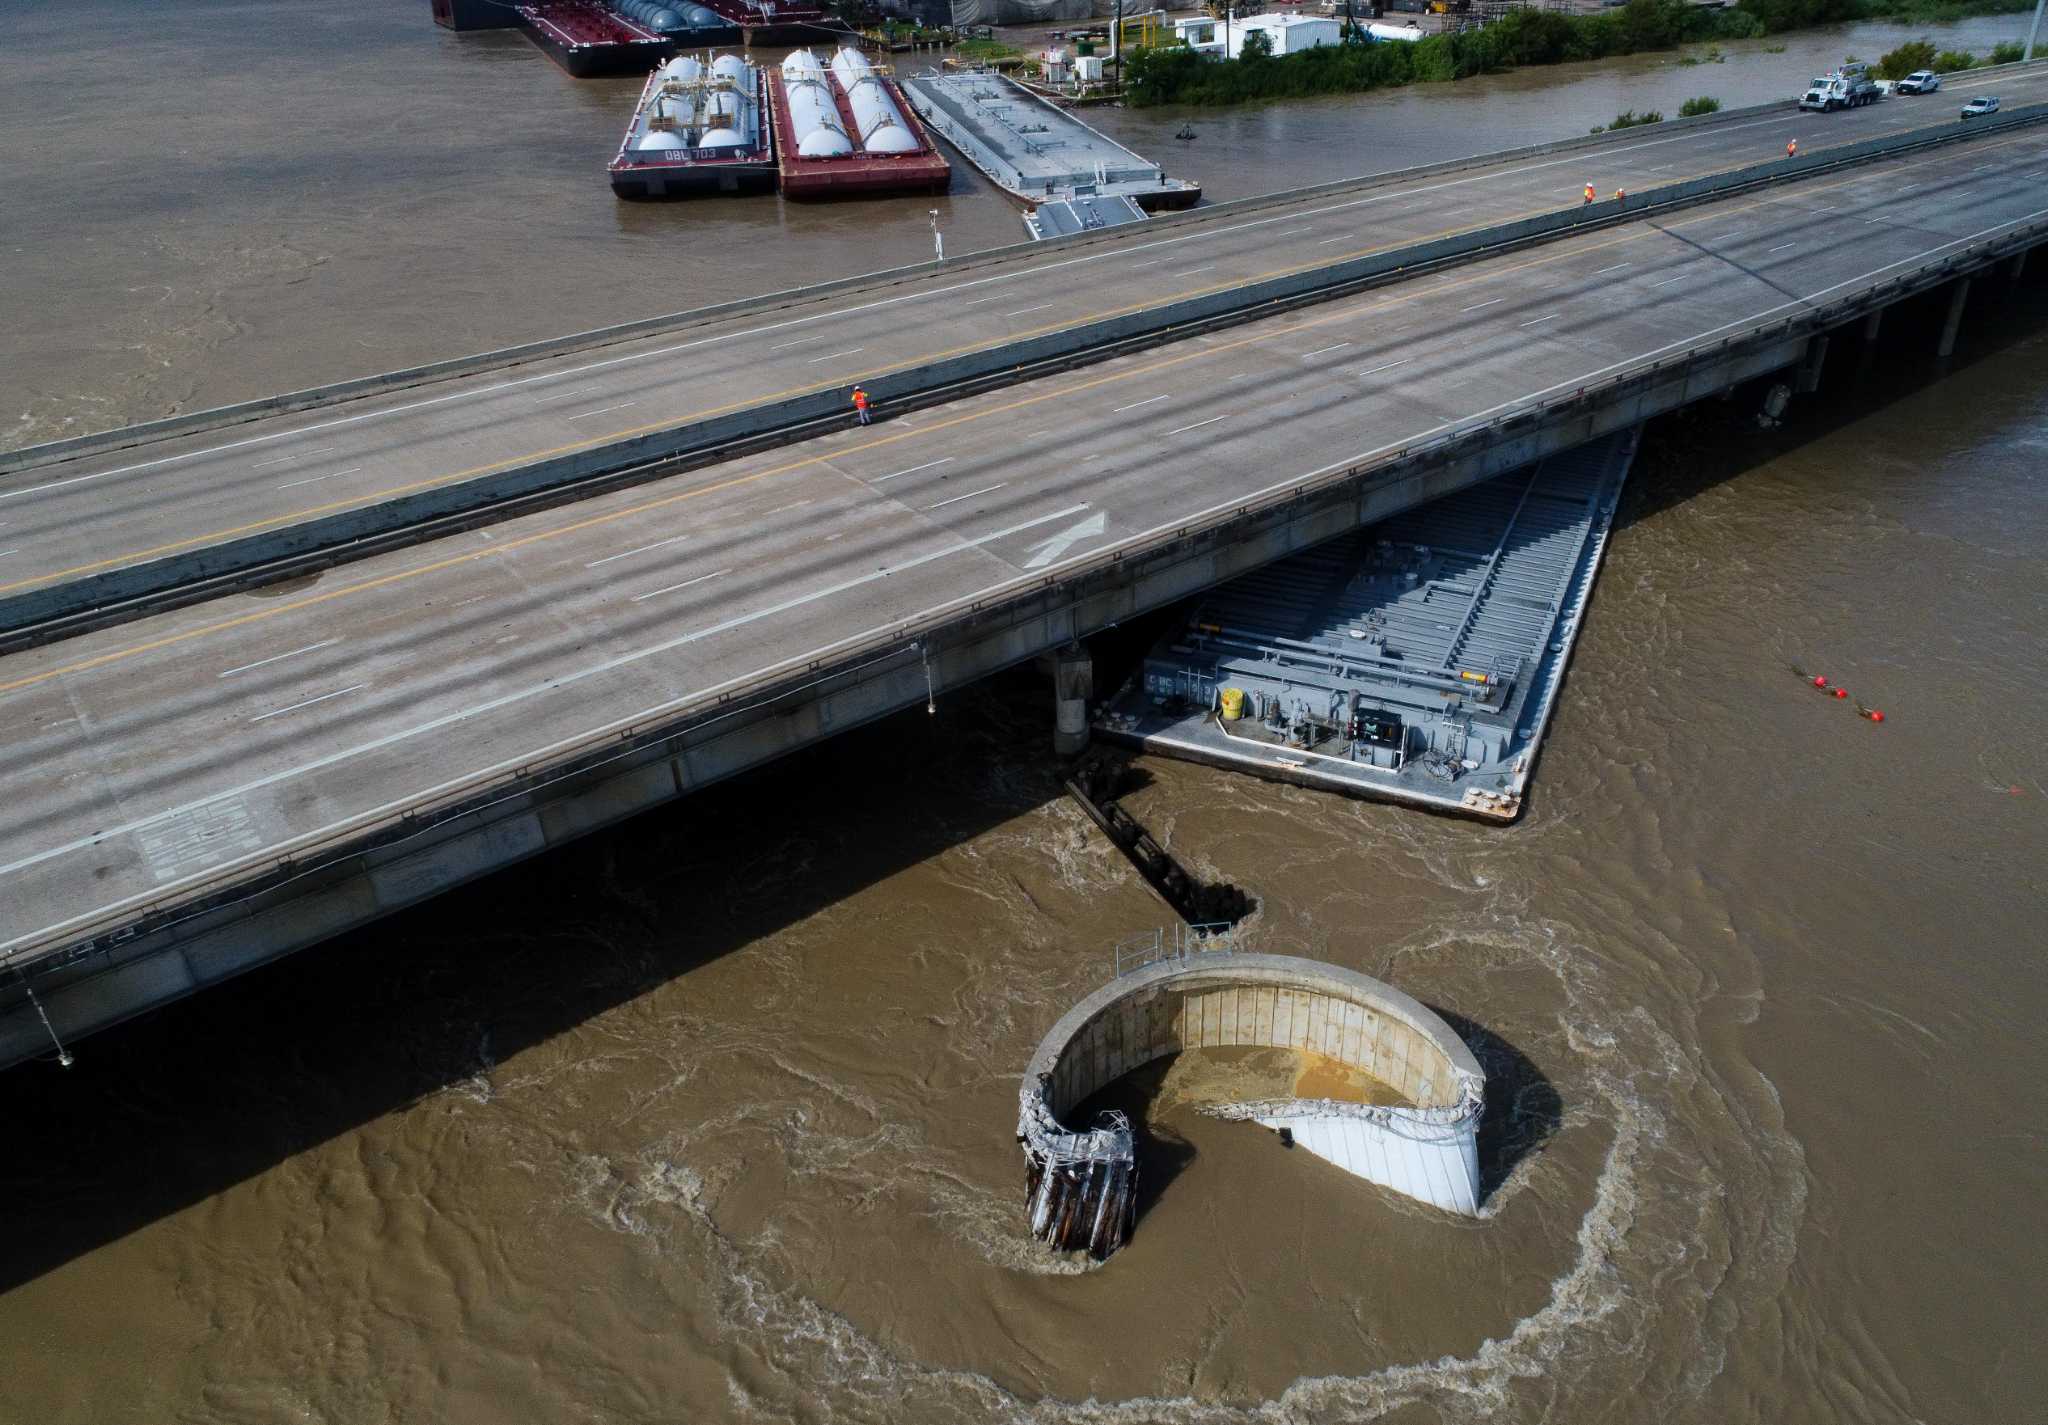 I10 bridge struck by runaway barges to remain closed for damage